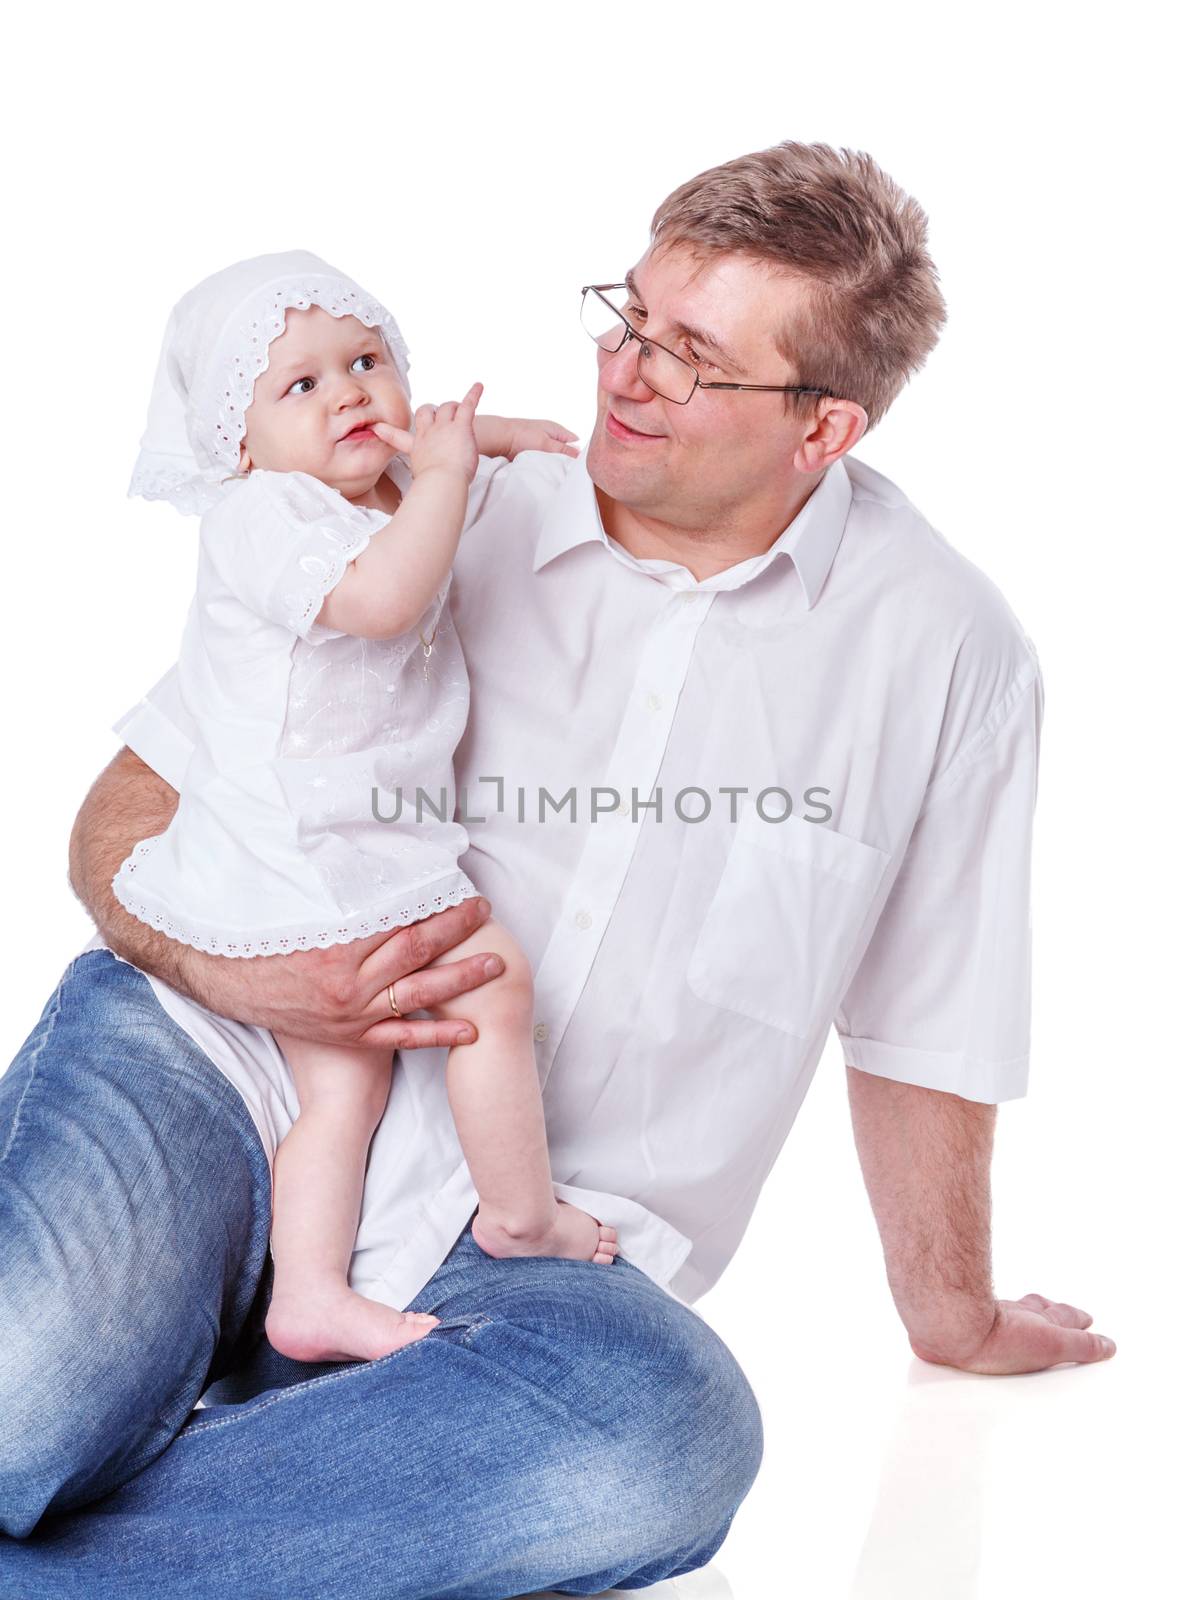 Father with baby girl posing isolated on white